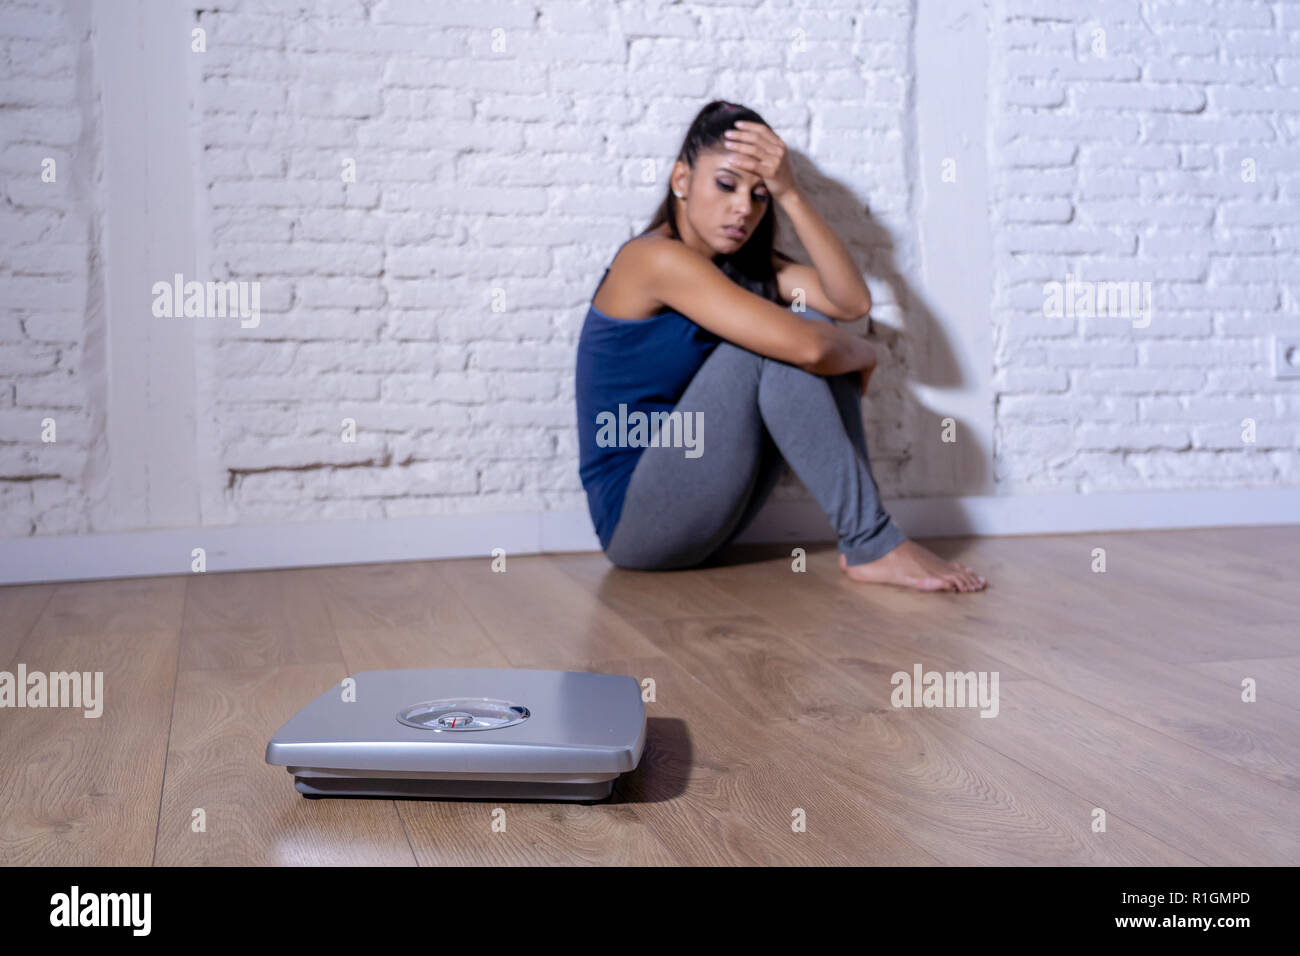 Young anorexic teenager woman sitting alone on ground looking at the scale worried and depressed in dieting and eating disorder concept Stock Photo